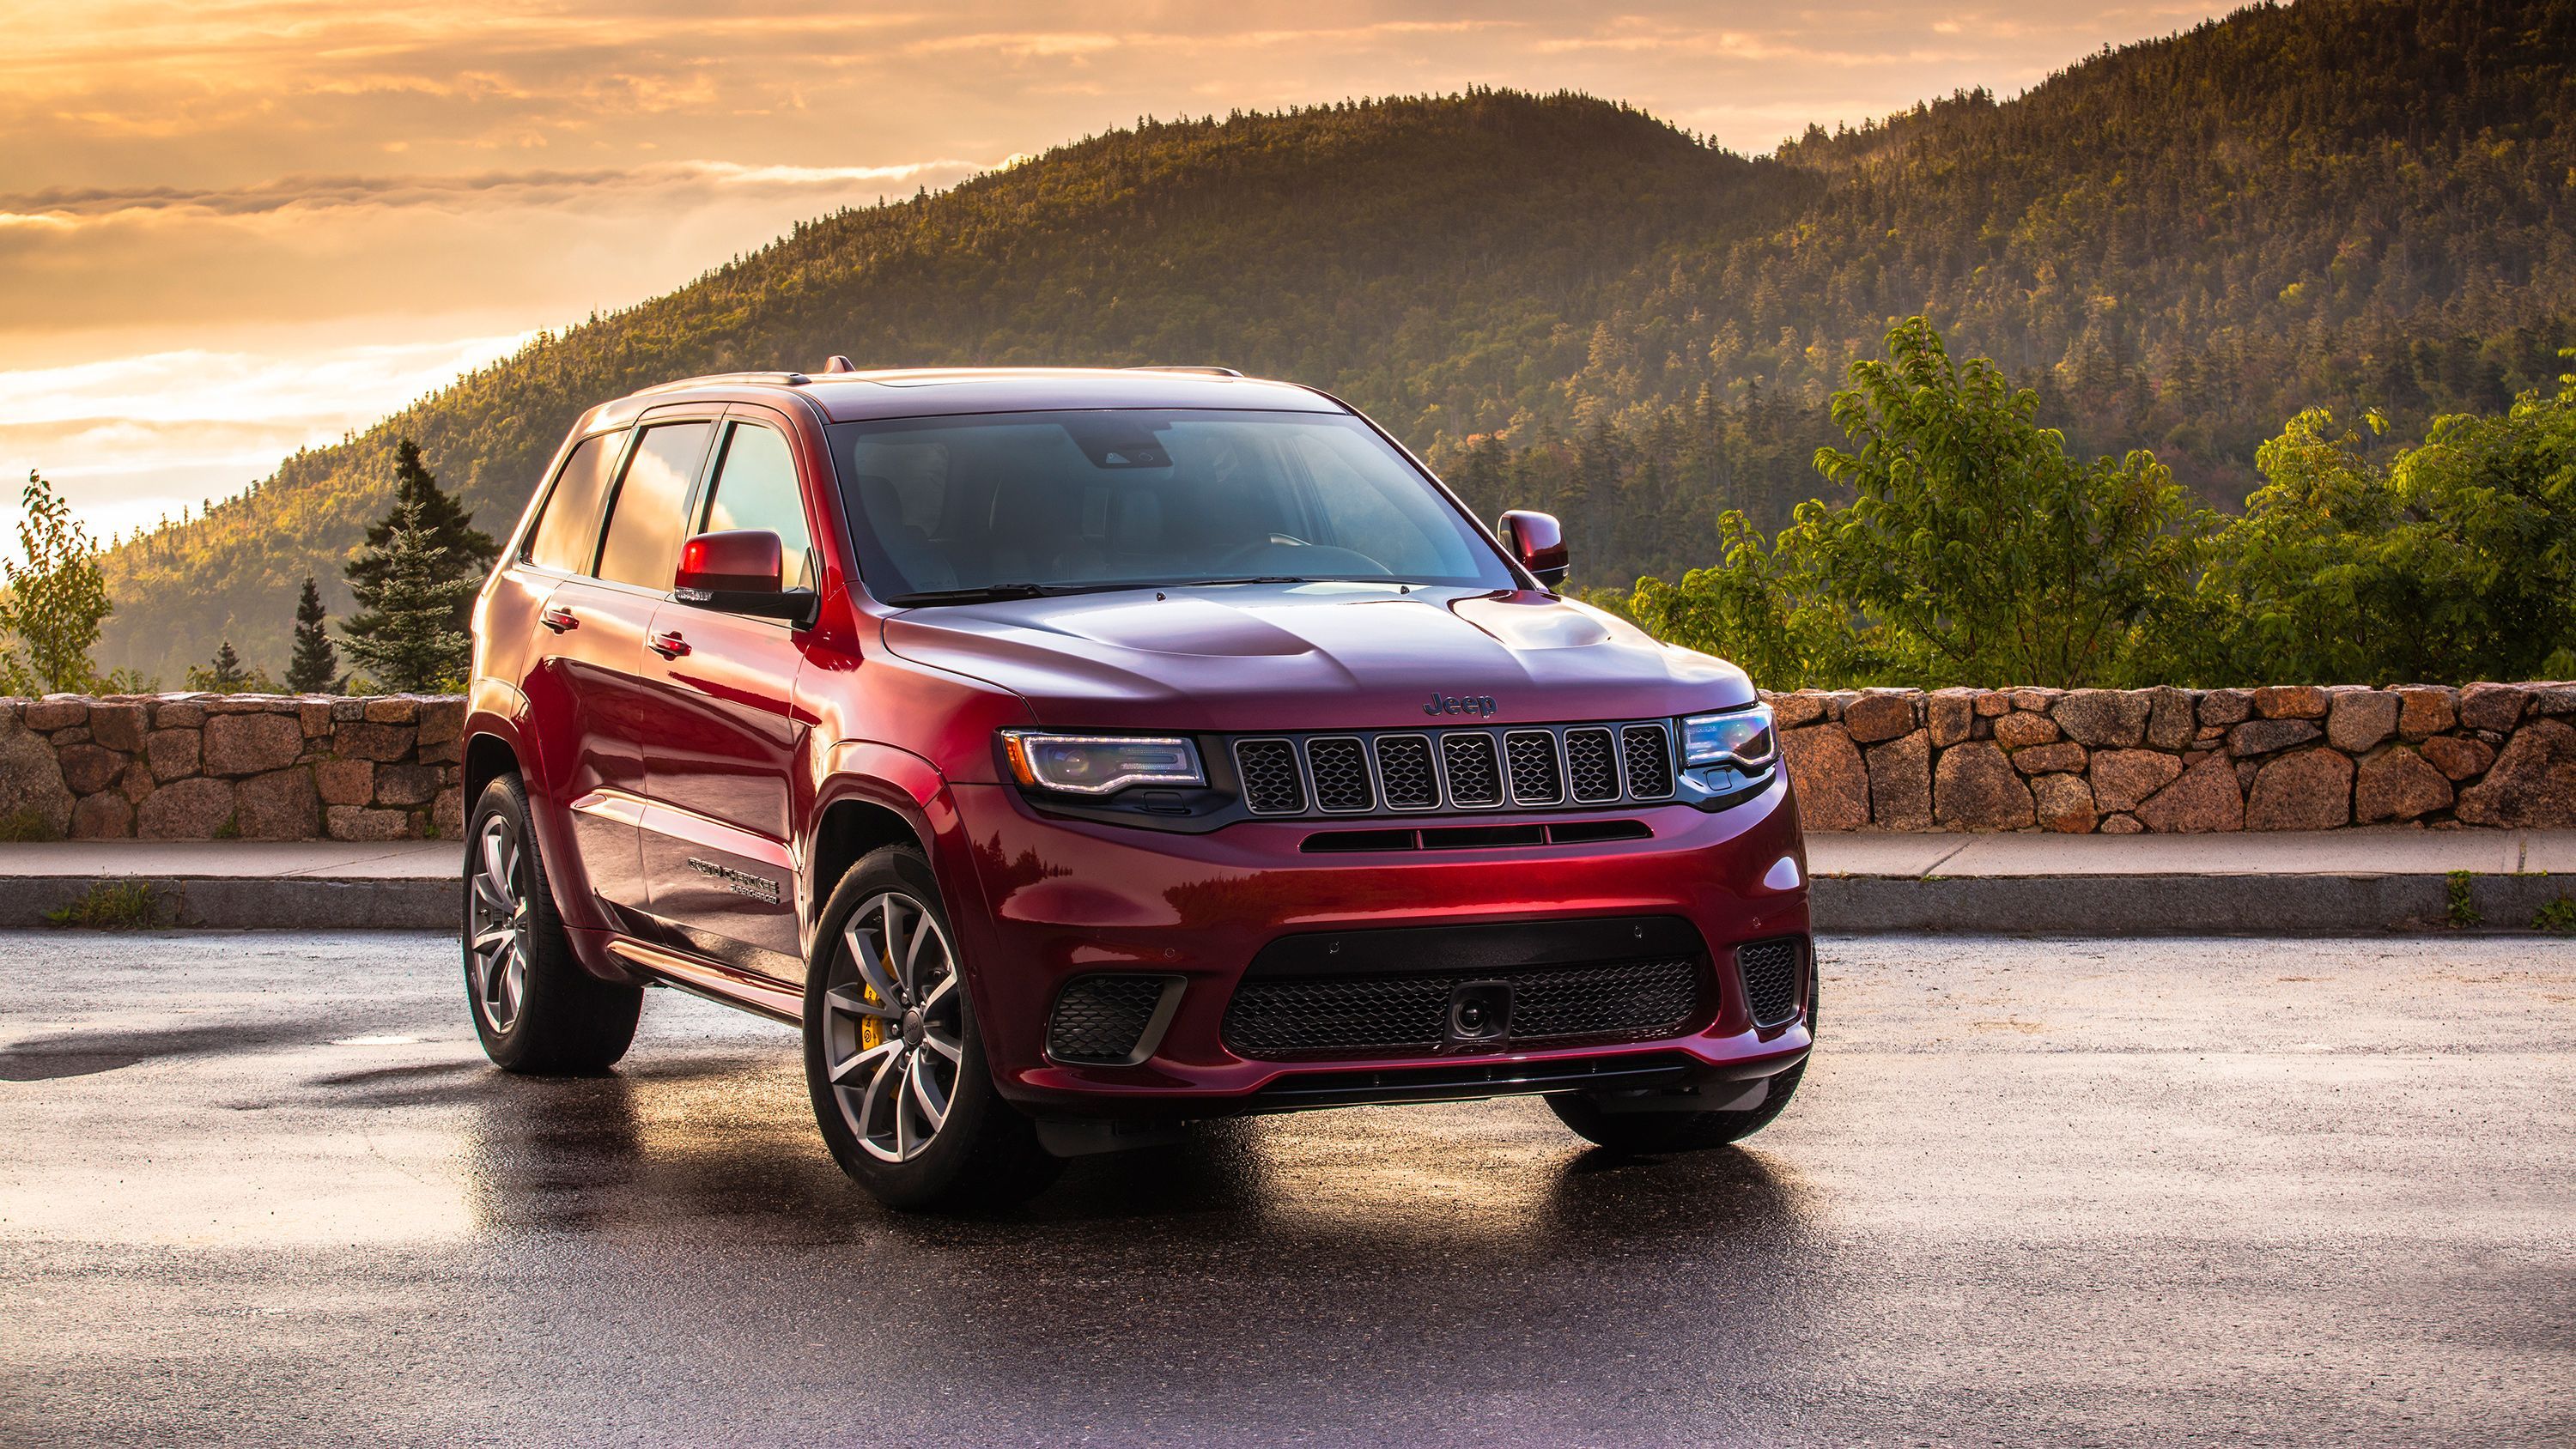 Jeep Grand Cherokee L Wallpapers